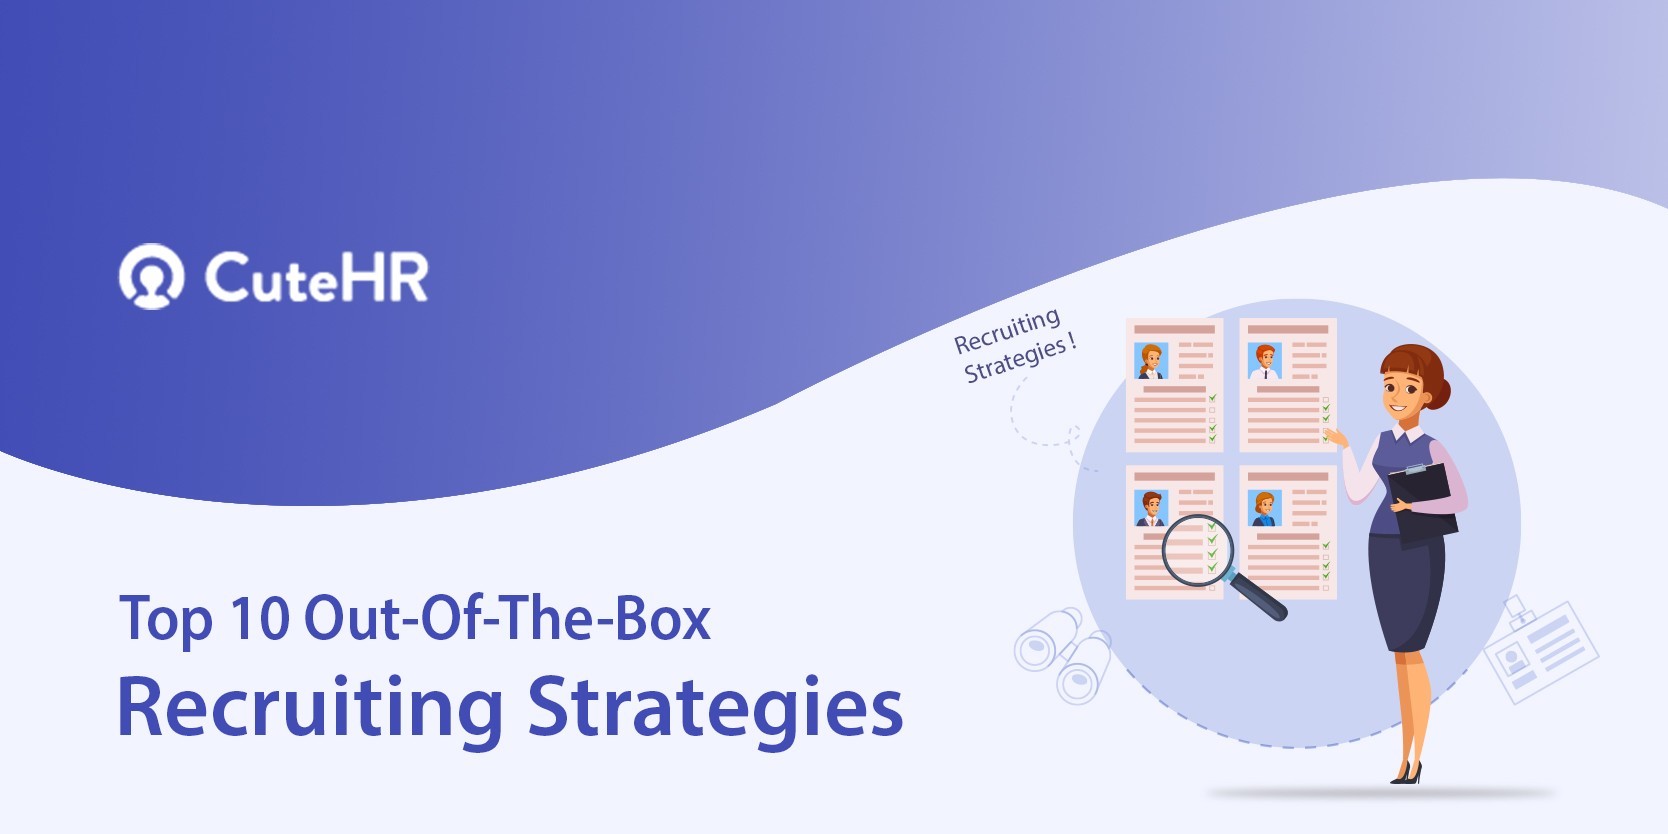 Top 10 Best Out-Of-The-Box Recruiting Strategies for 2022